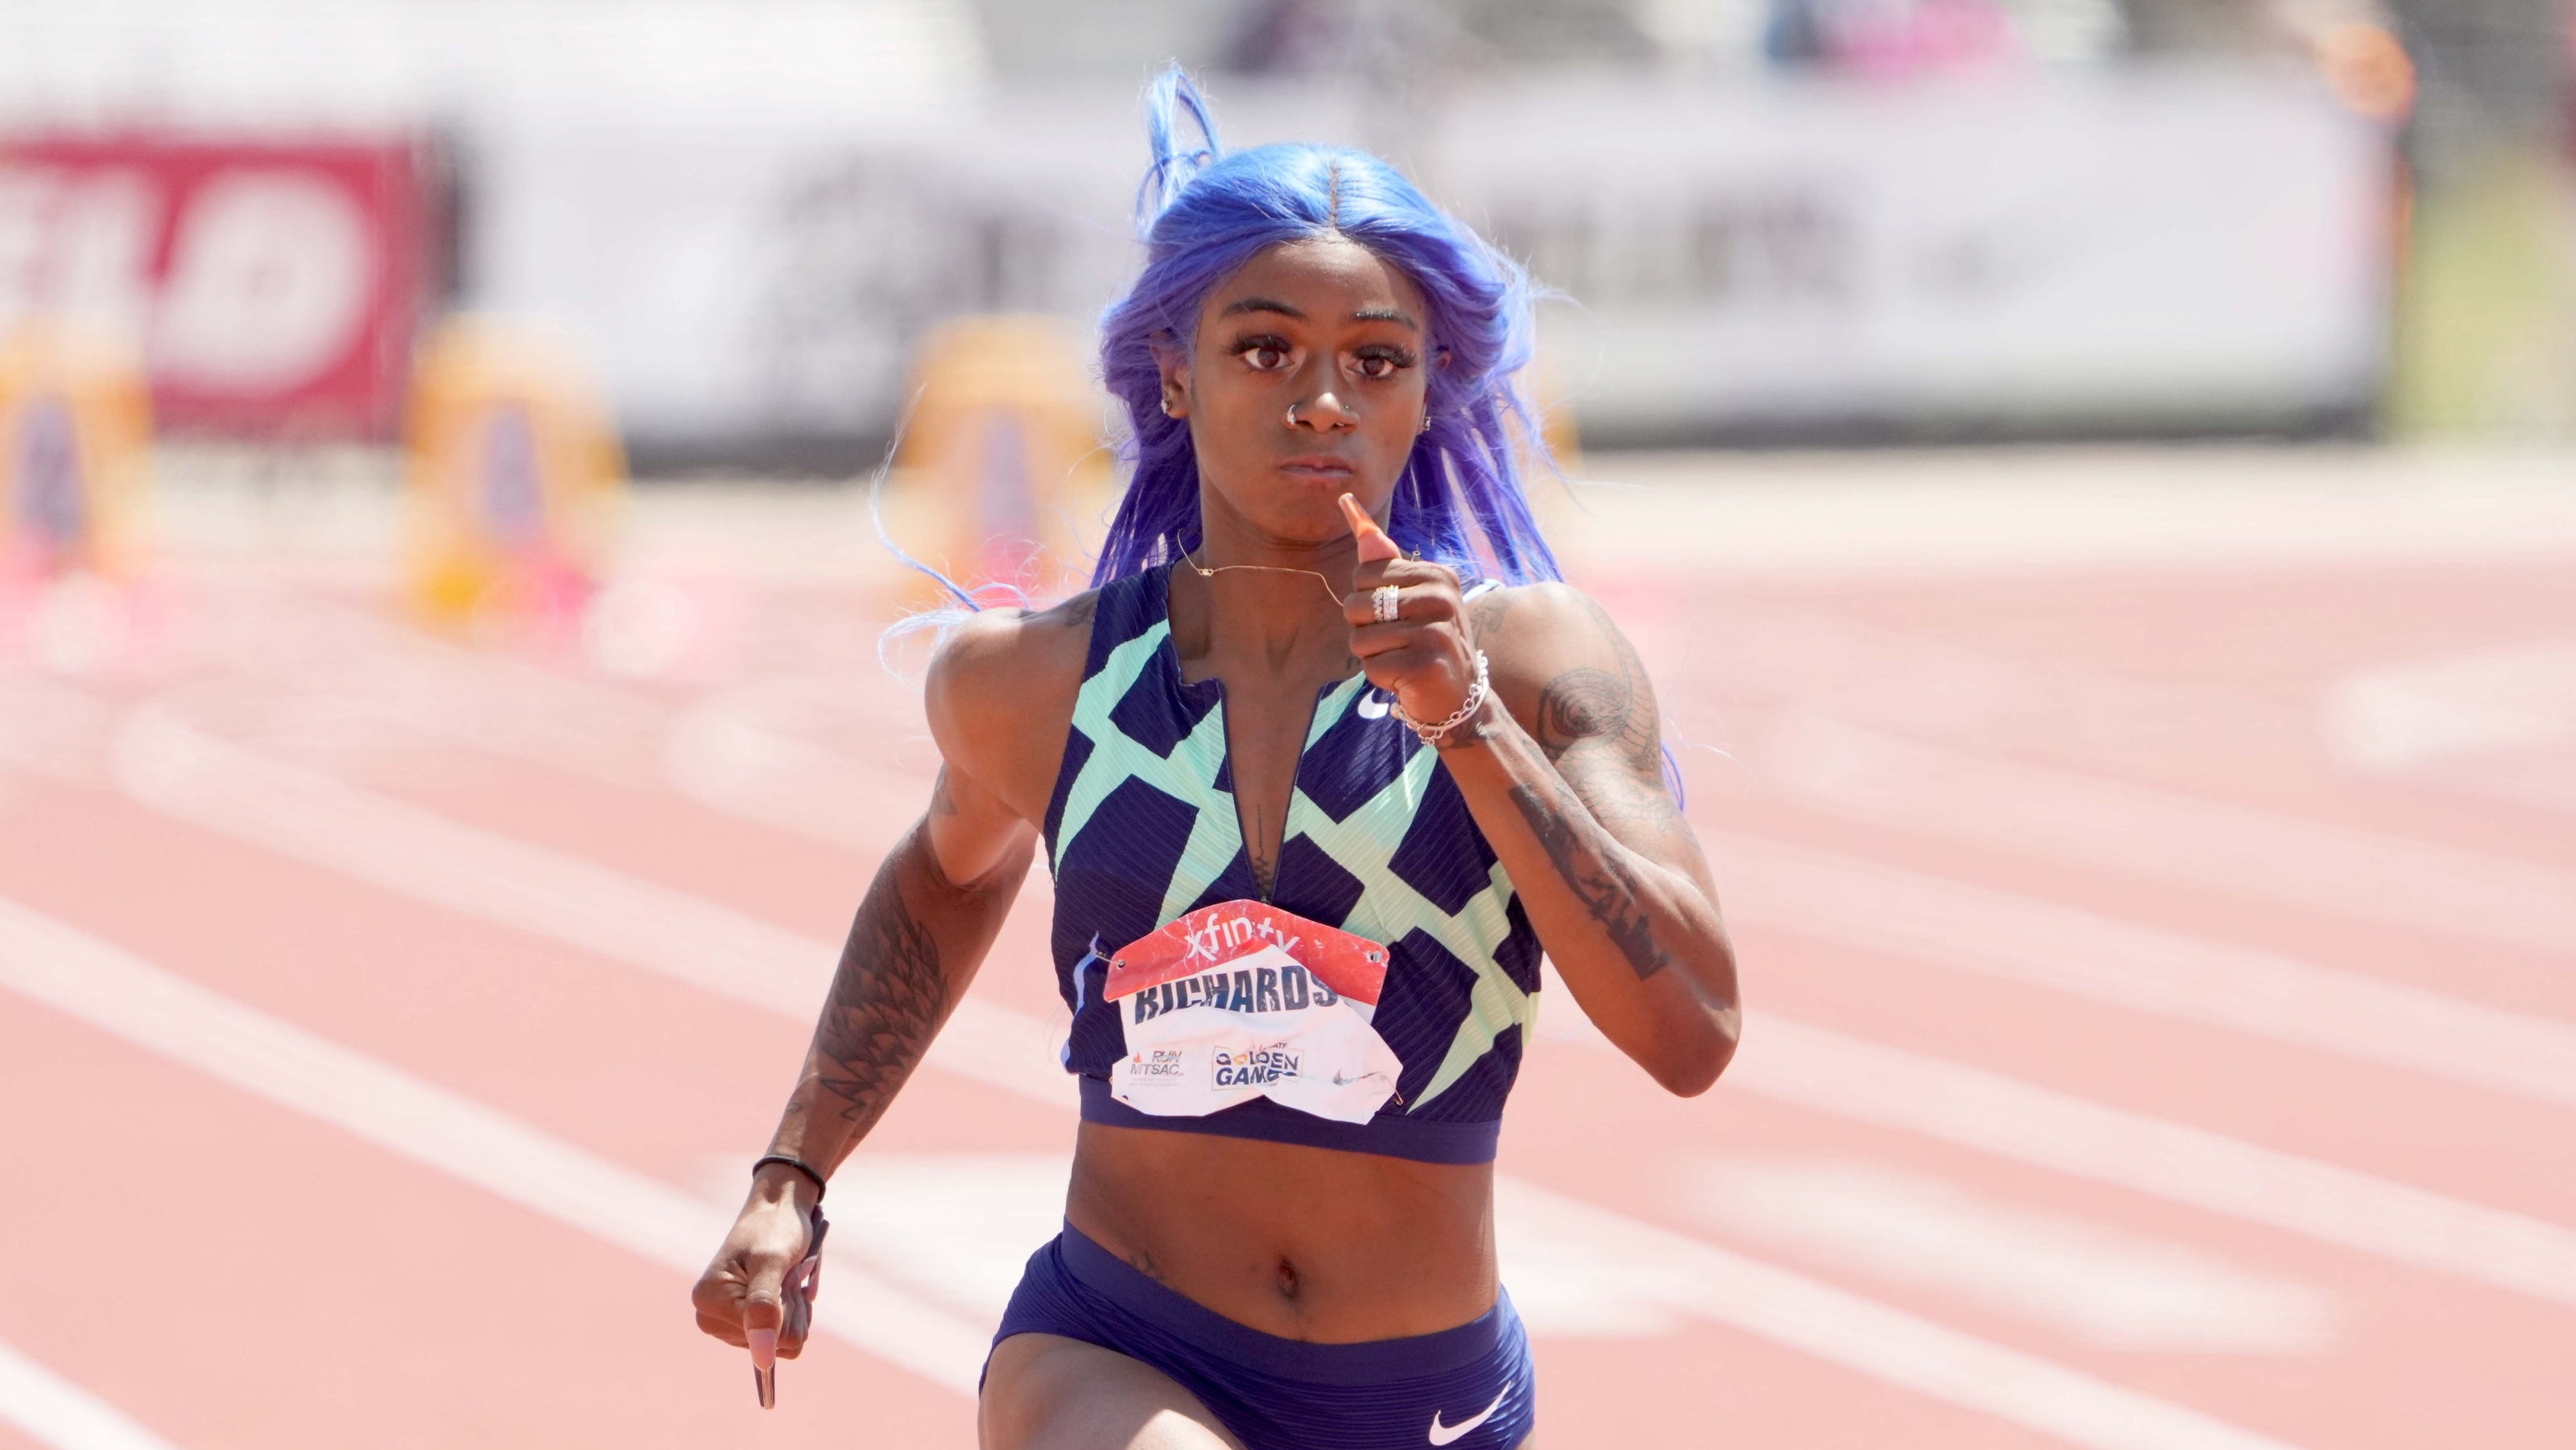 Sha'Carri Richardson not picked for 4x100 relay team, will miss Tokyo Olympics...